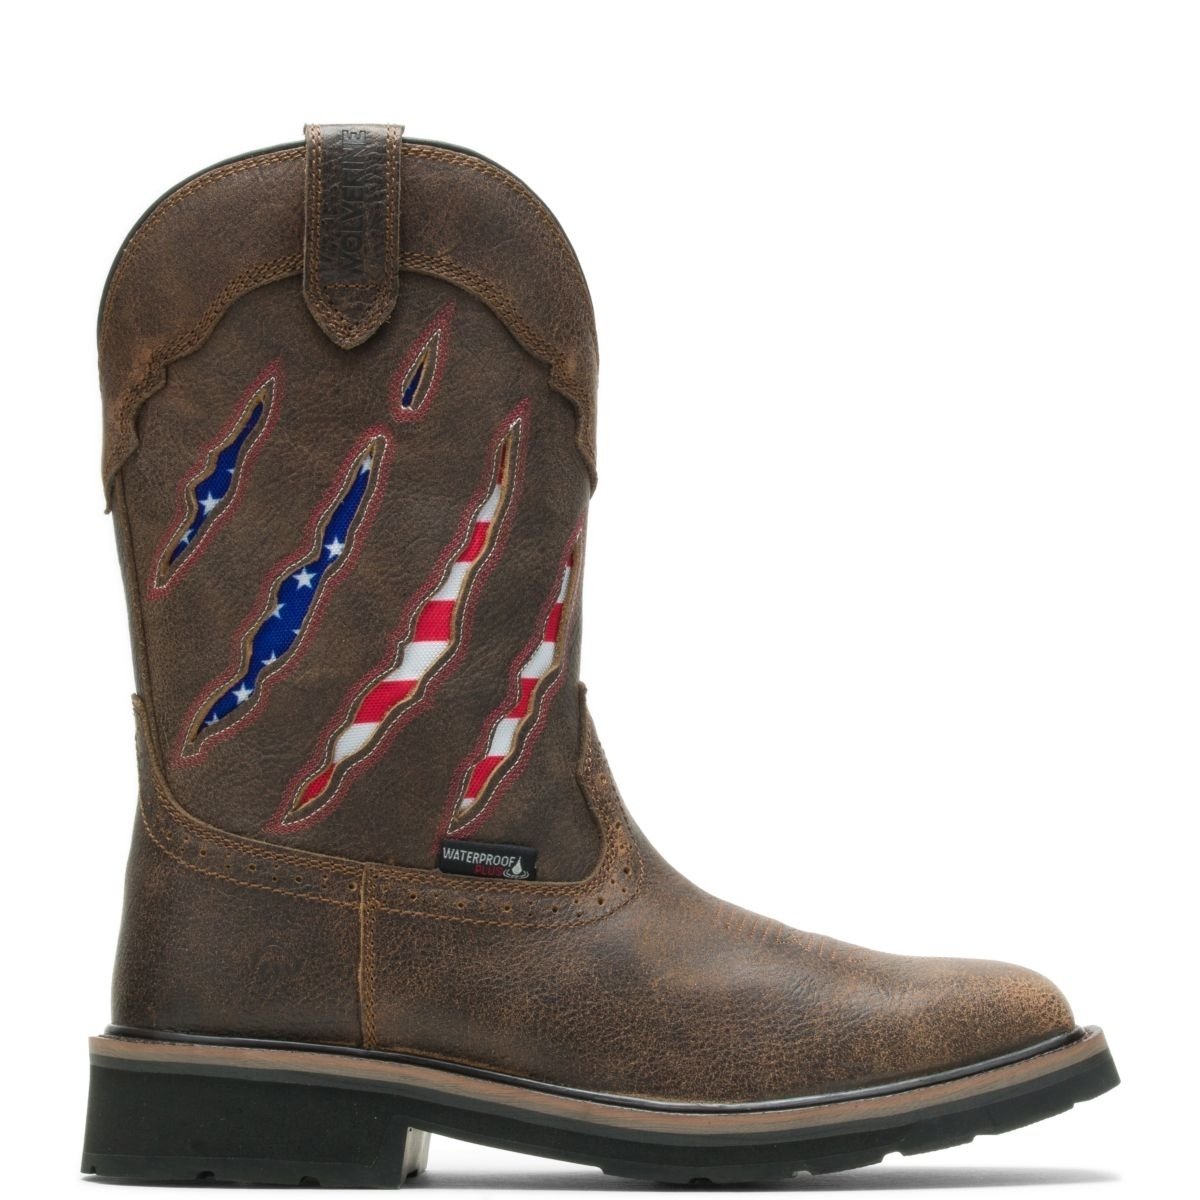 WOLVERINE Men's Rancher Claw Wellington Soft Toe Work Boot Brown/Flag - W200138 Flag/brown - Flag/brown, 9